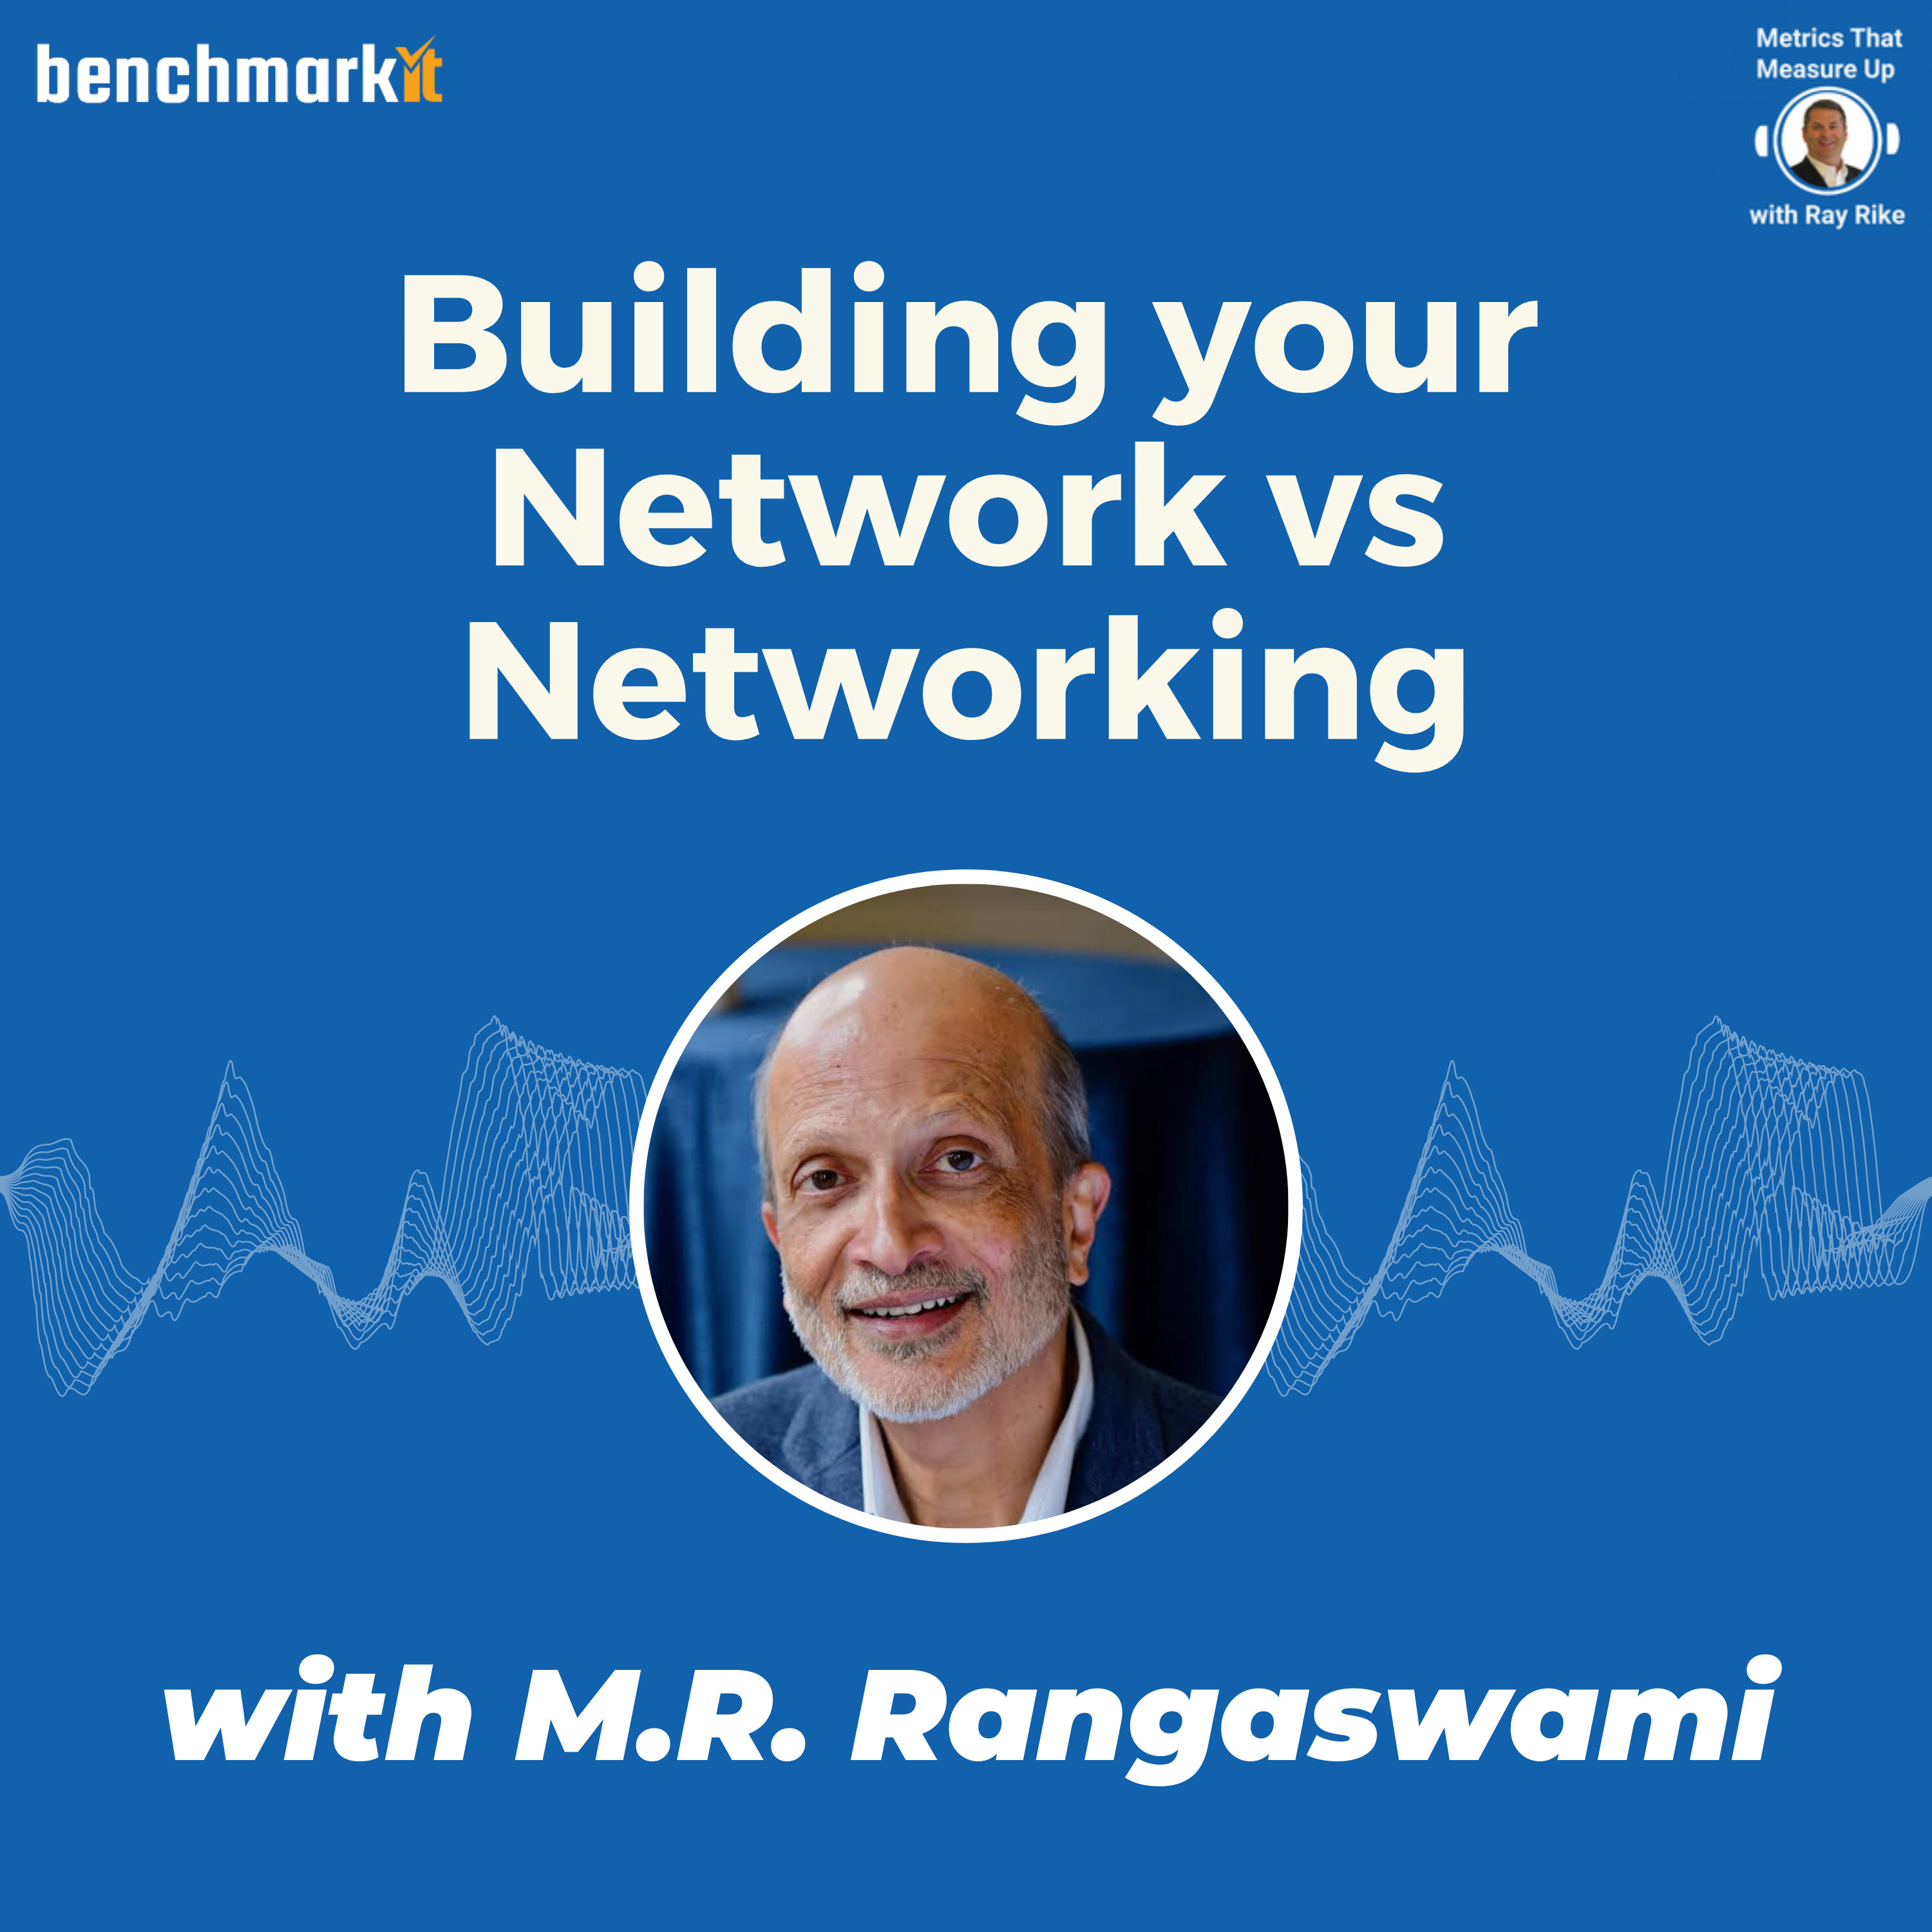 Building your Network versus Networking - in Silicon Valley and Beyond with M.R. Rangaswami